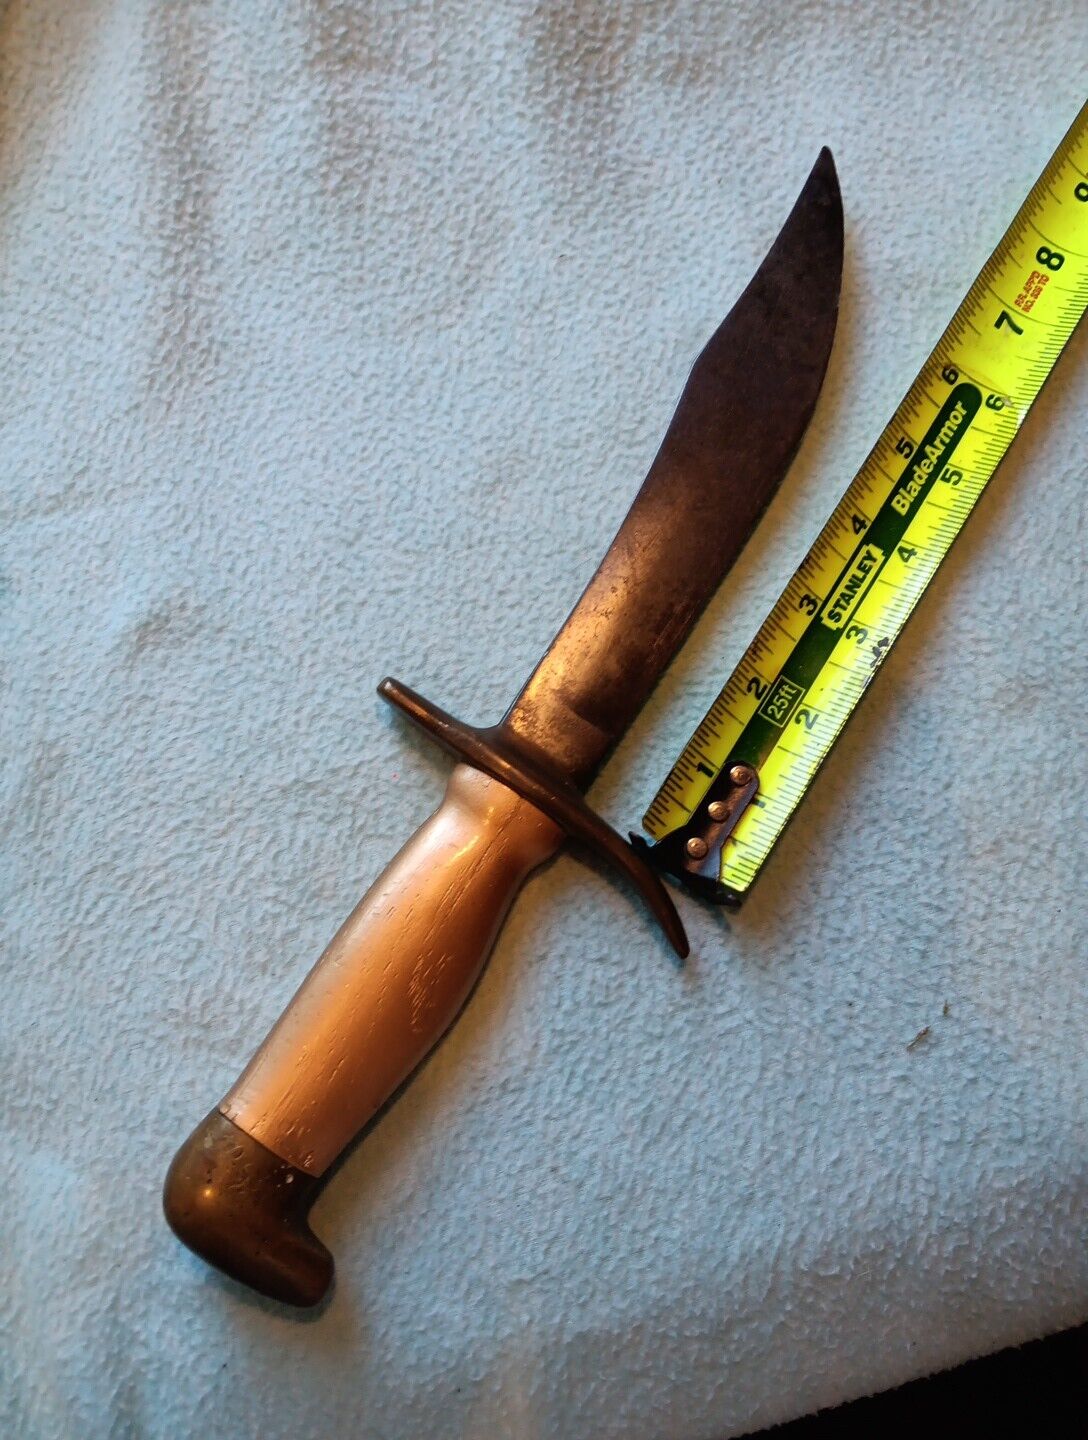 Vintage Trench Art Unbranded Handmade Carbon Steel Bowie